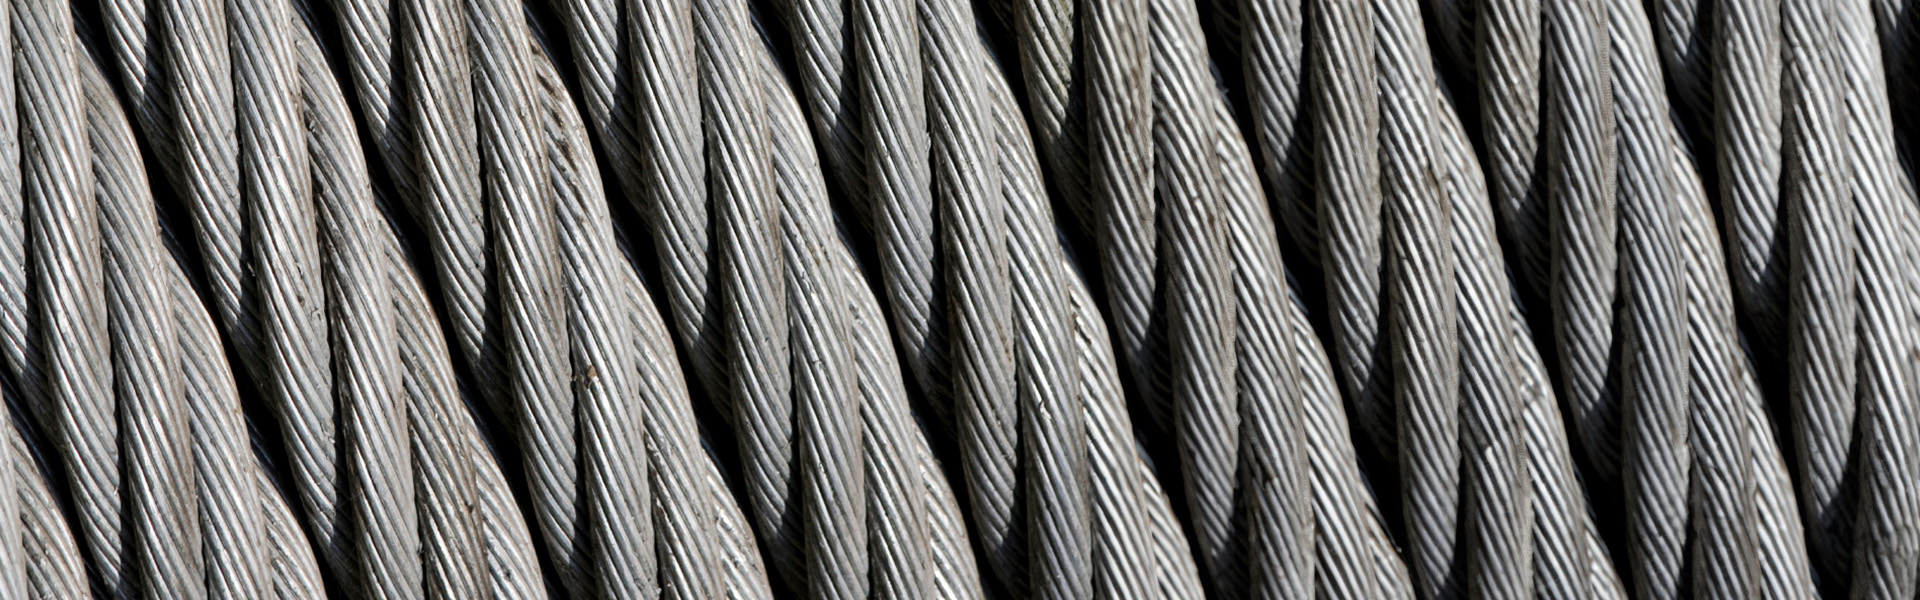 Close up of wire rope